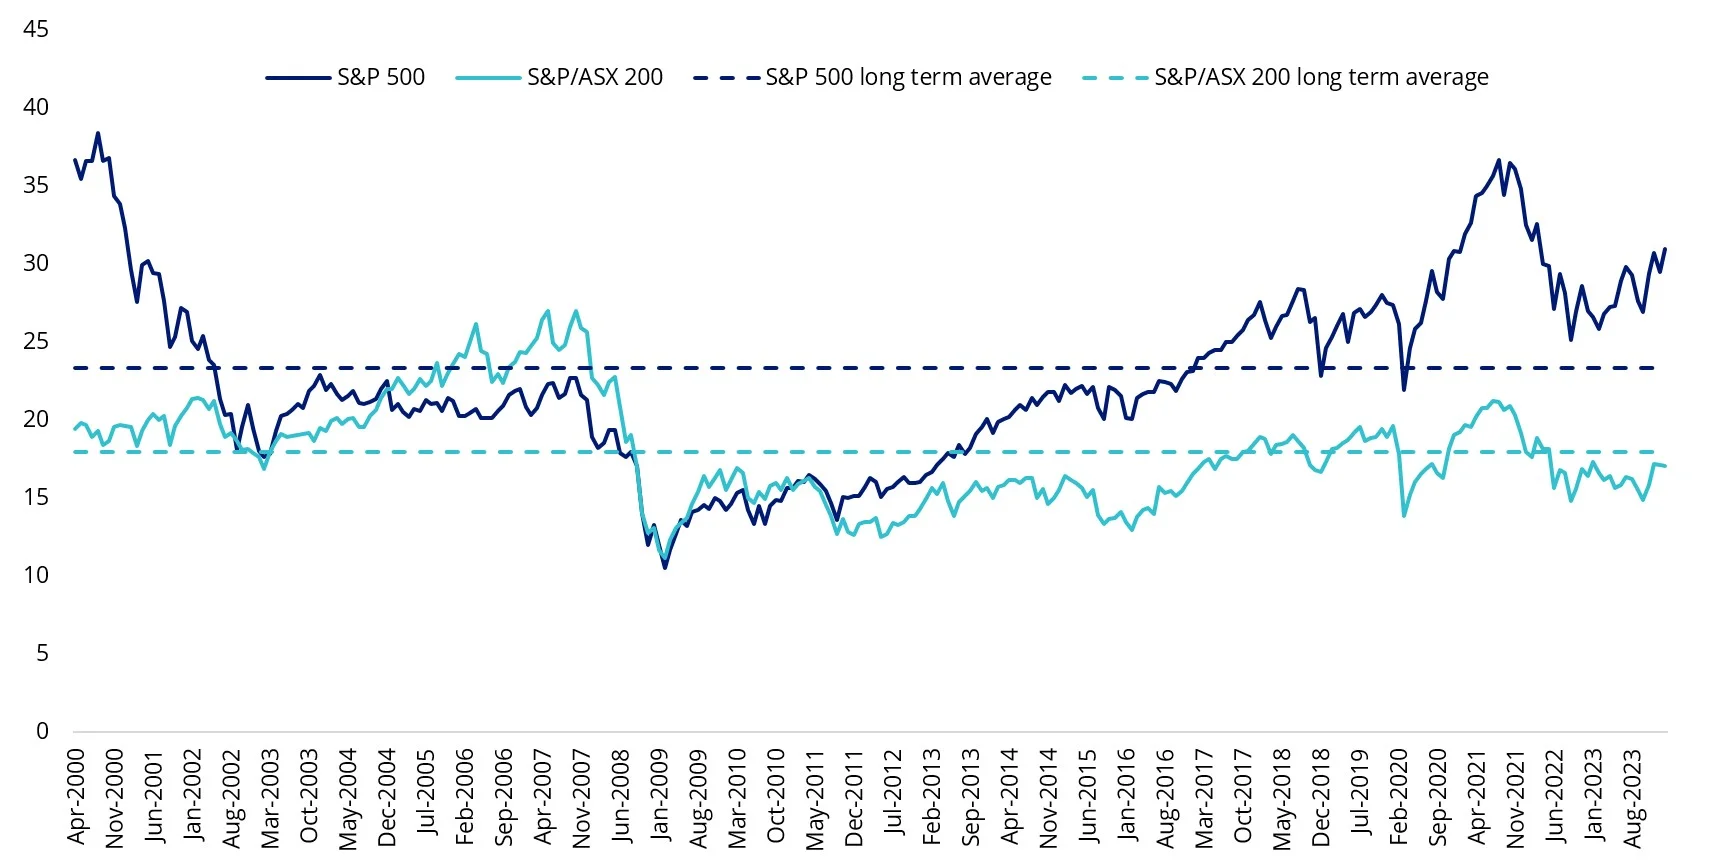 Historical CAPE ratio, S&P 500 and S&P/ASX 200